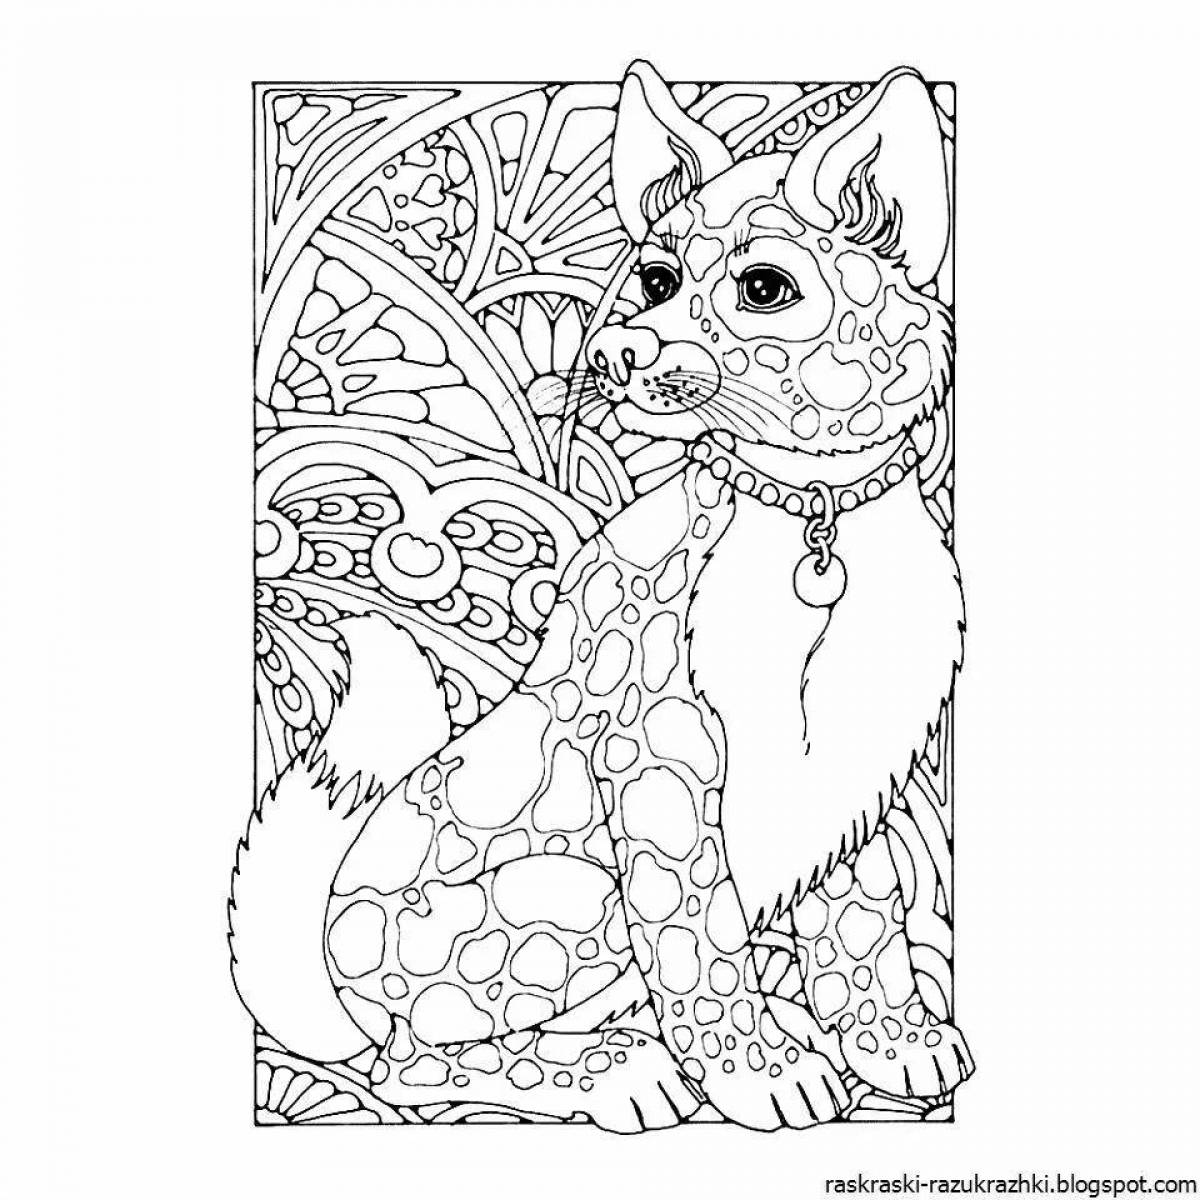 Incredible coloring for girls 11 years old animals